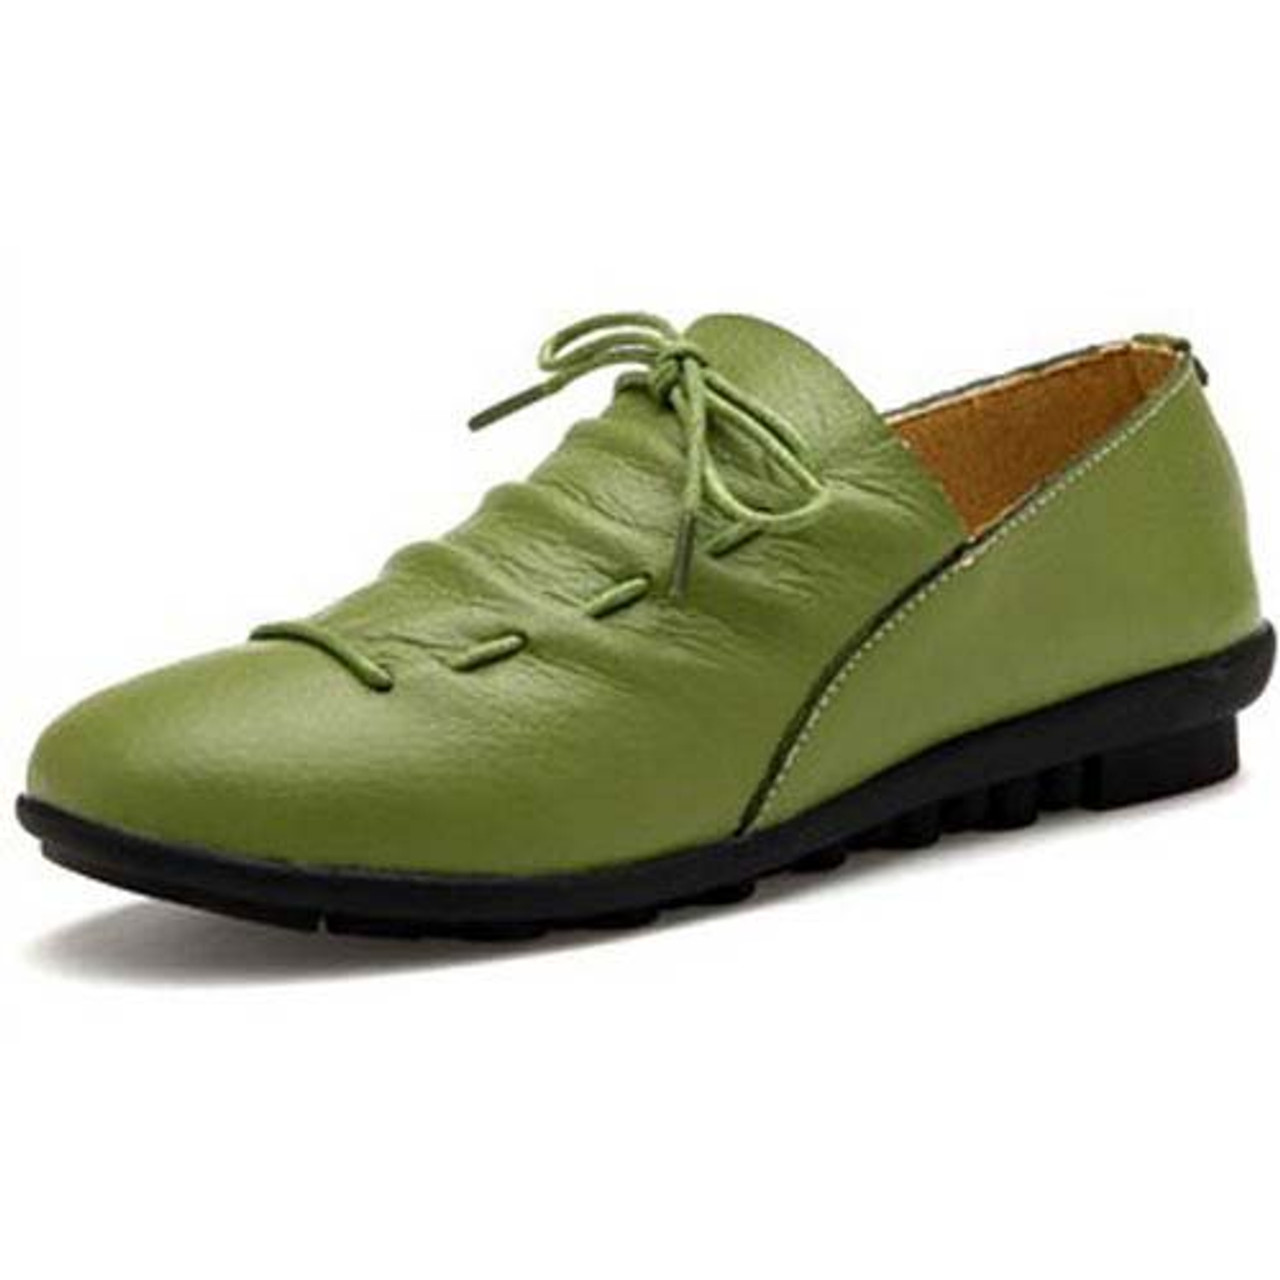 oxford shoes womens greece